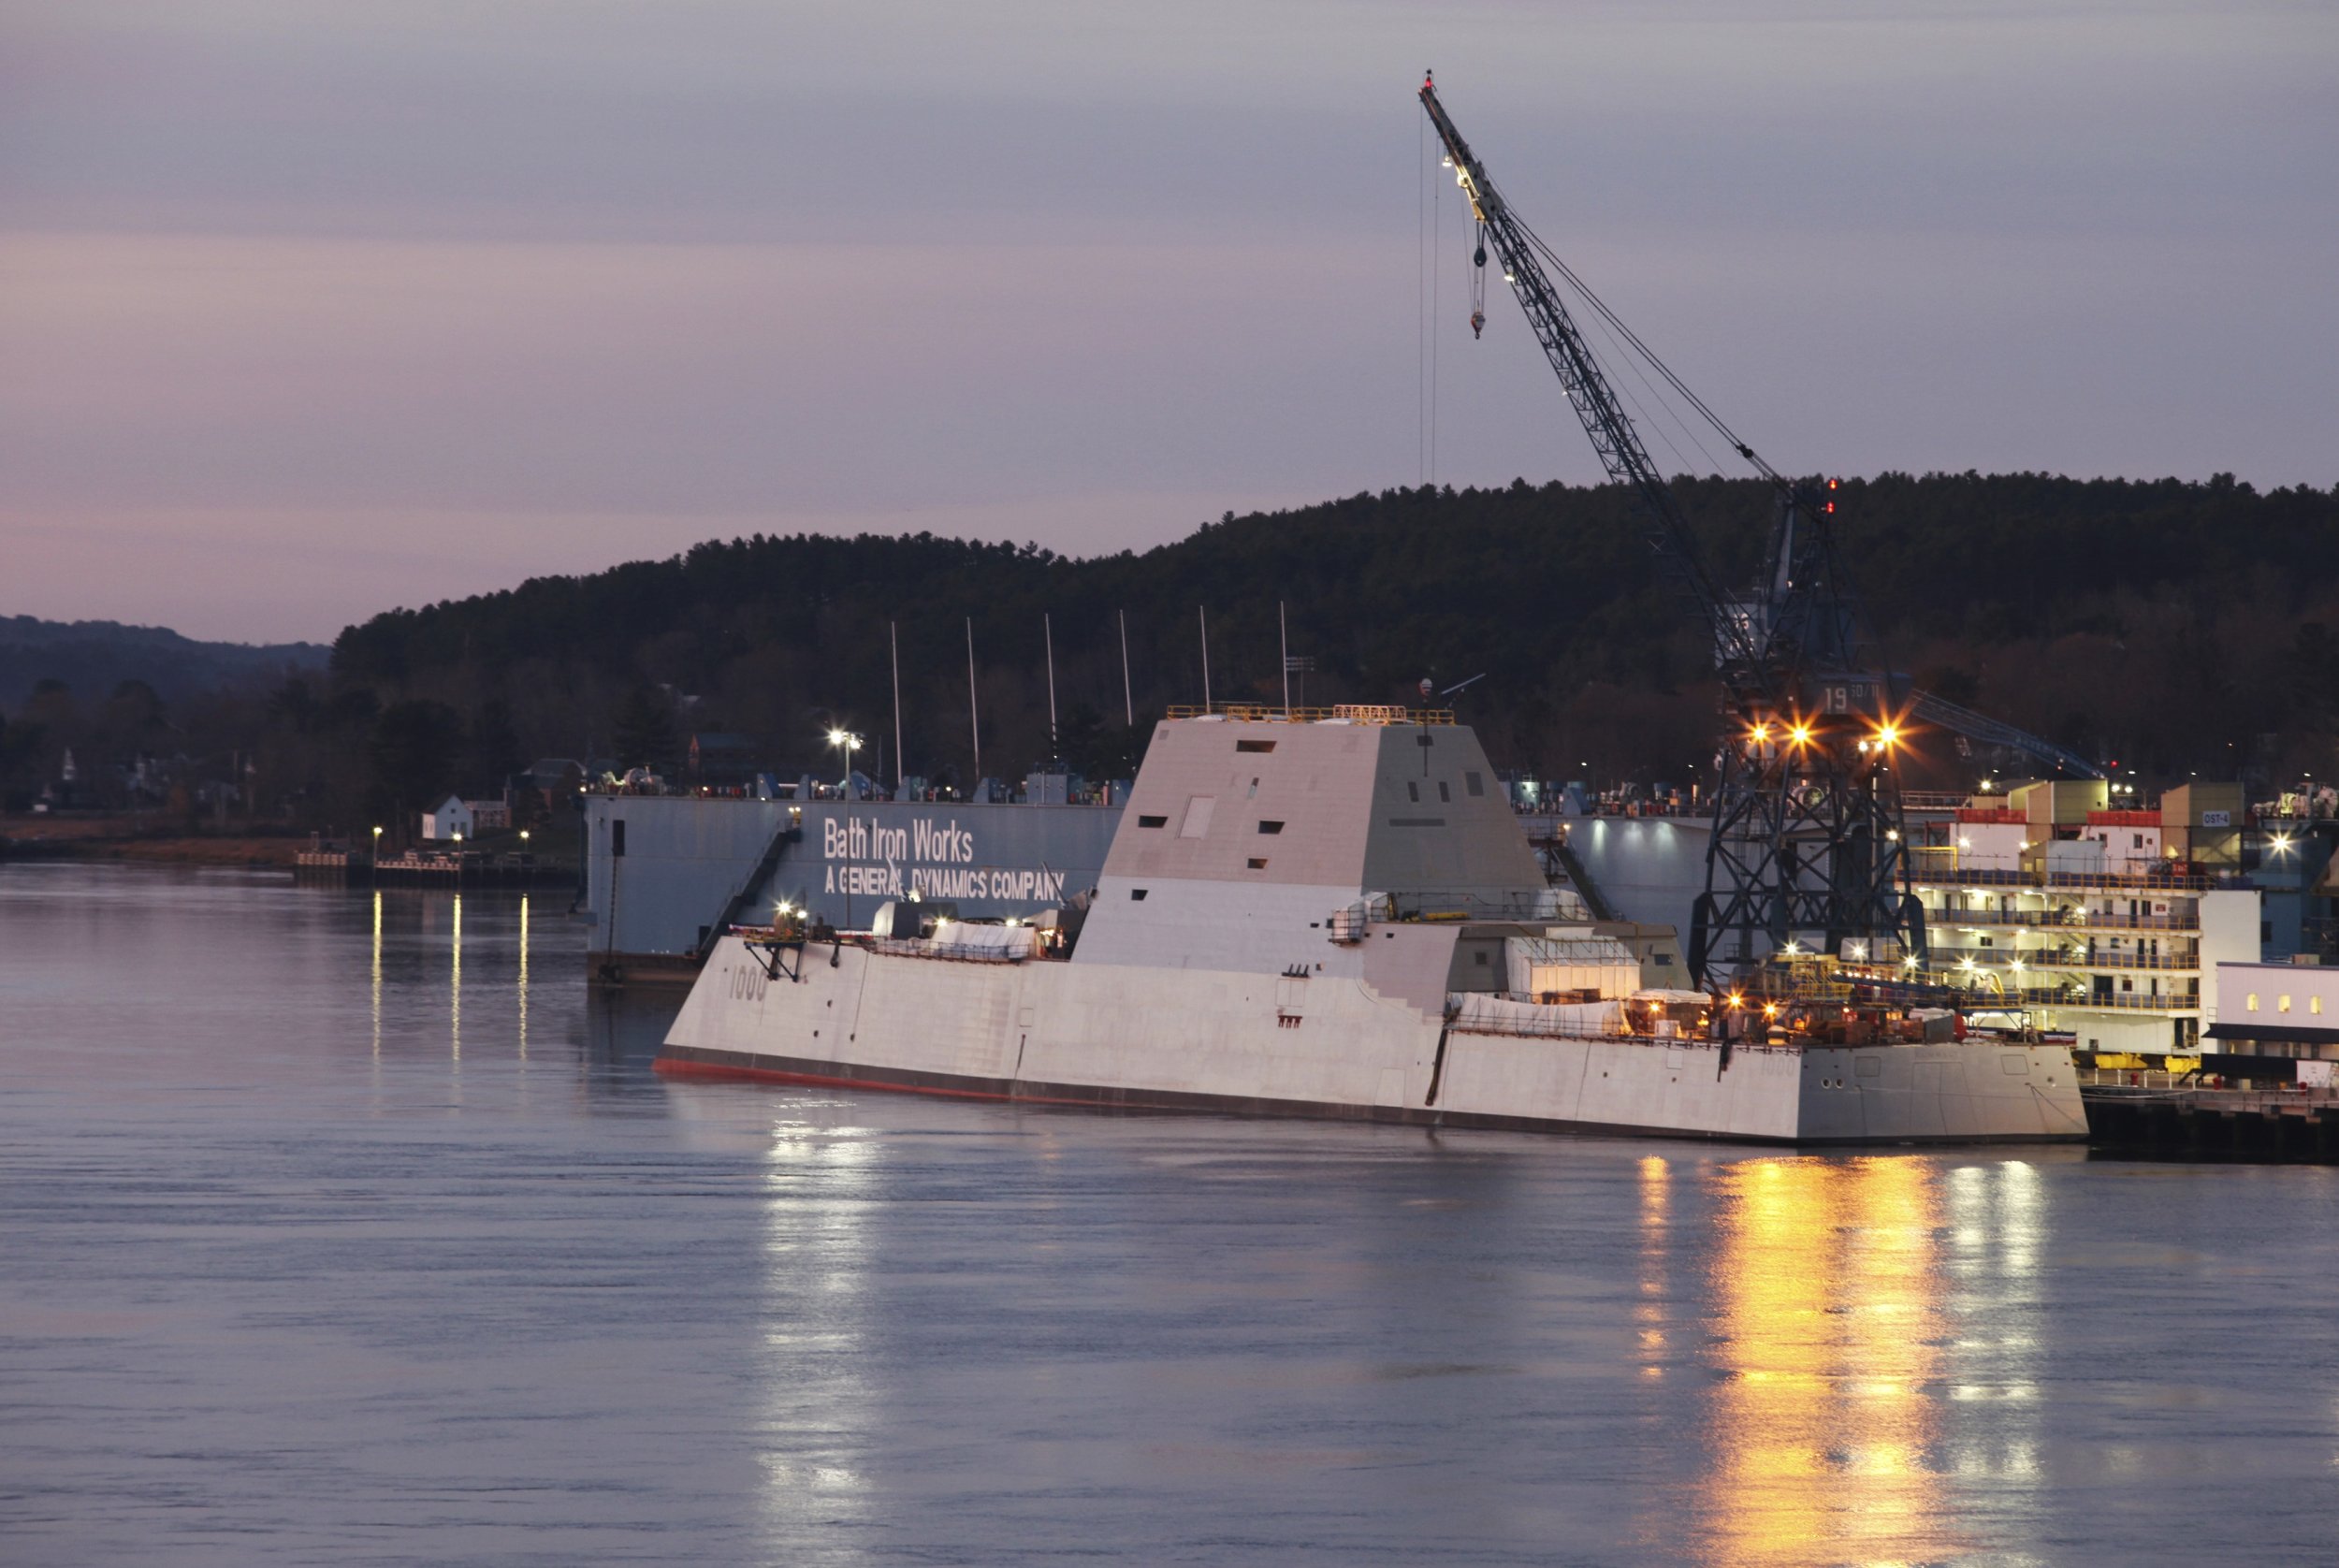 Us Navy Introduces Futuristic Destroyer Uss Zumwalt Is The Largest Of Its Class Ever Built For